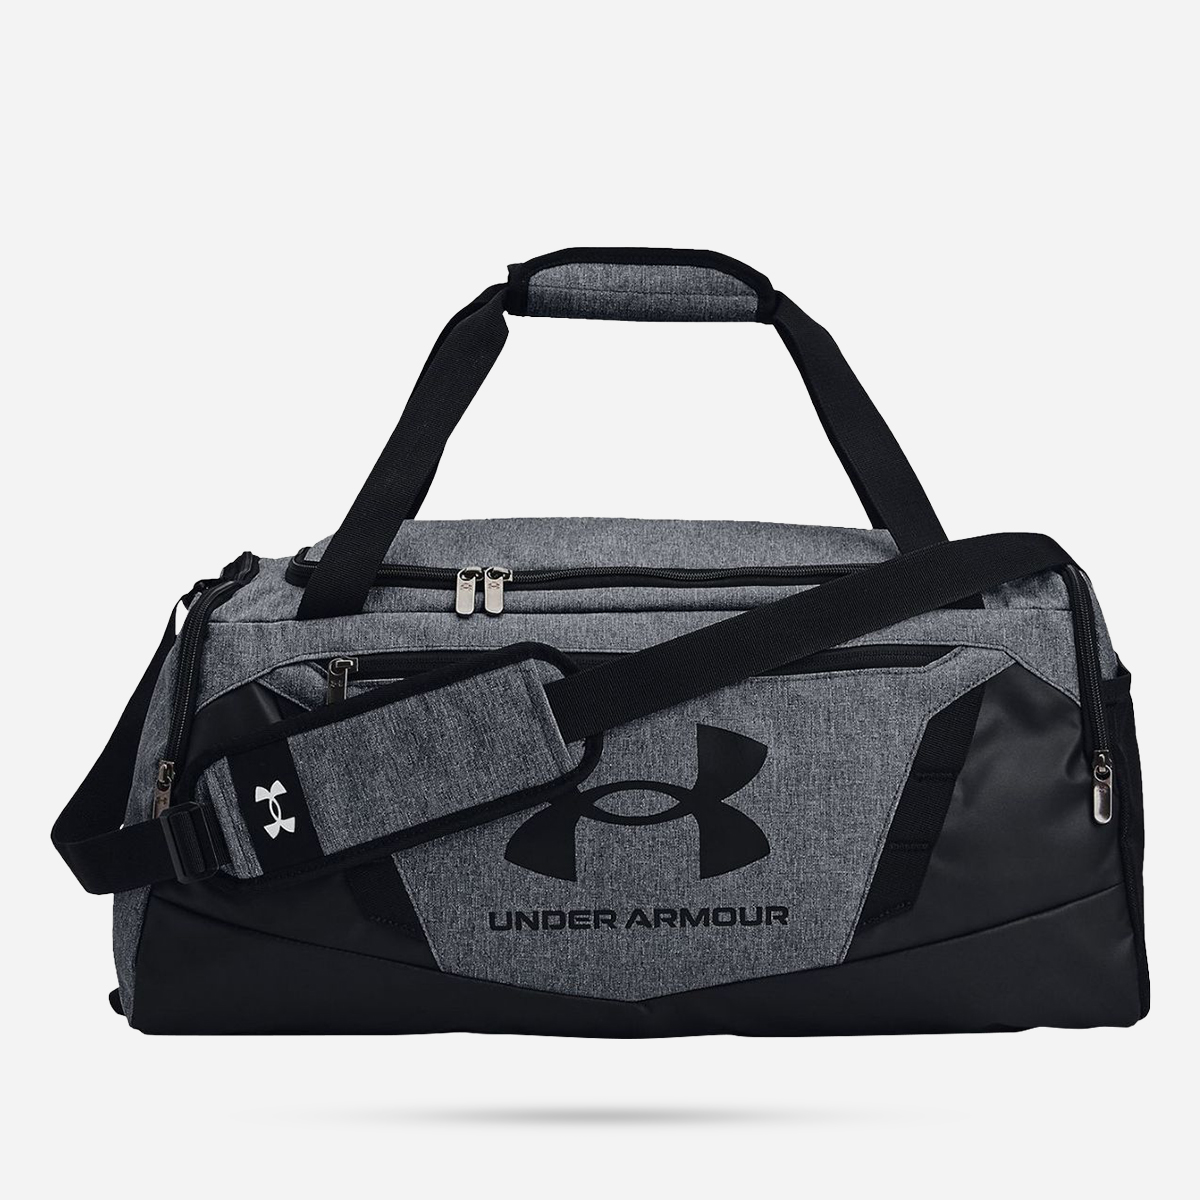 AN288082 Undeniable 5.0 Duffle SM